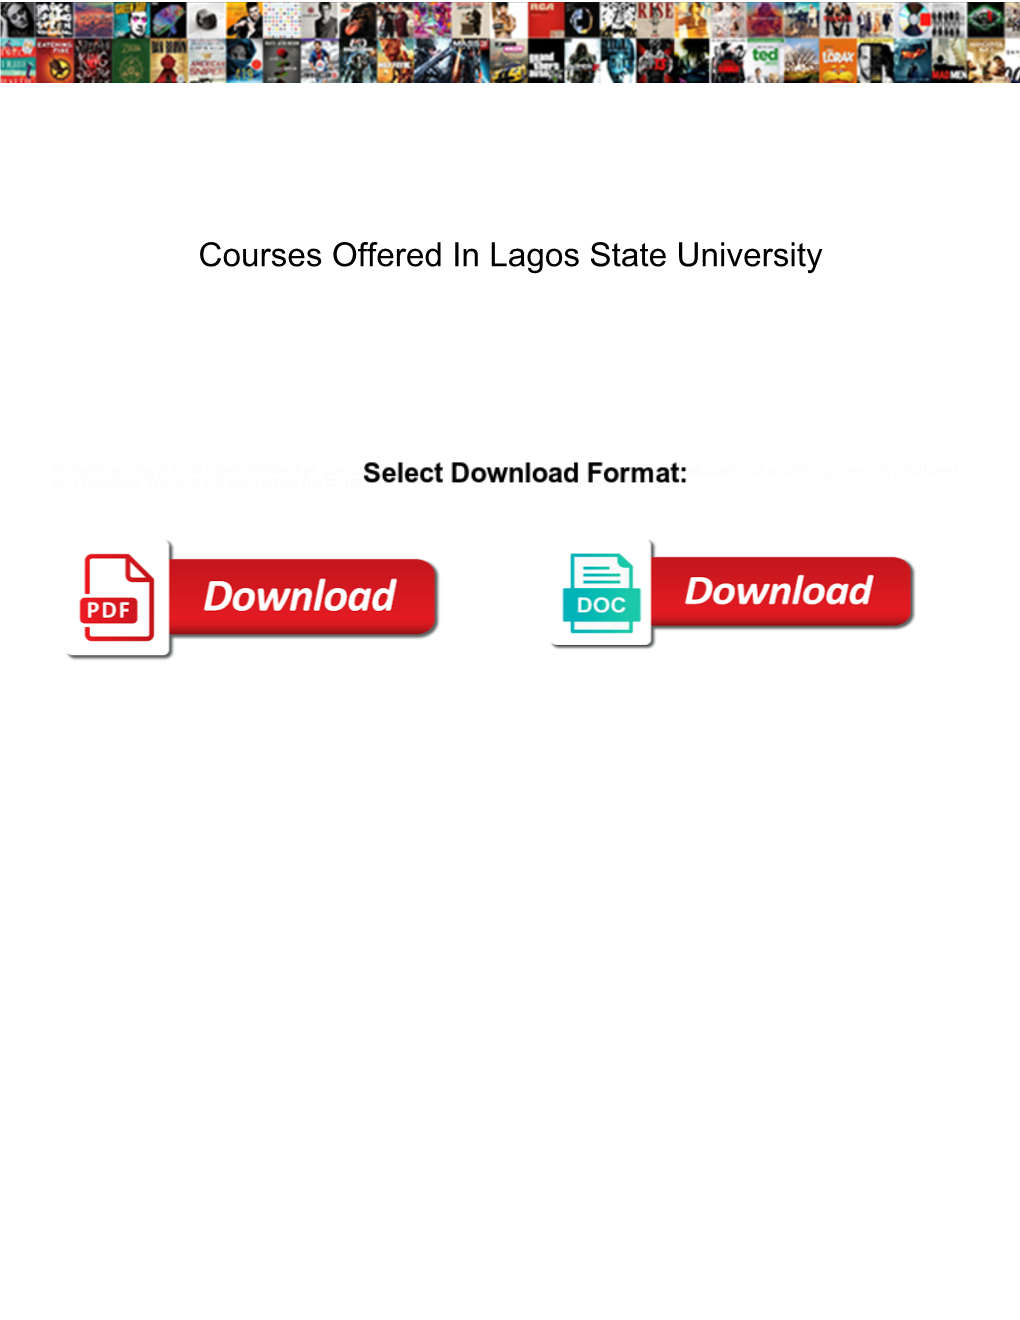 Courses Offered in Lagos State University